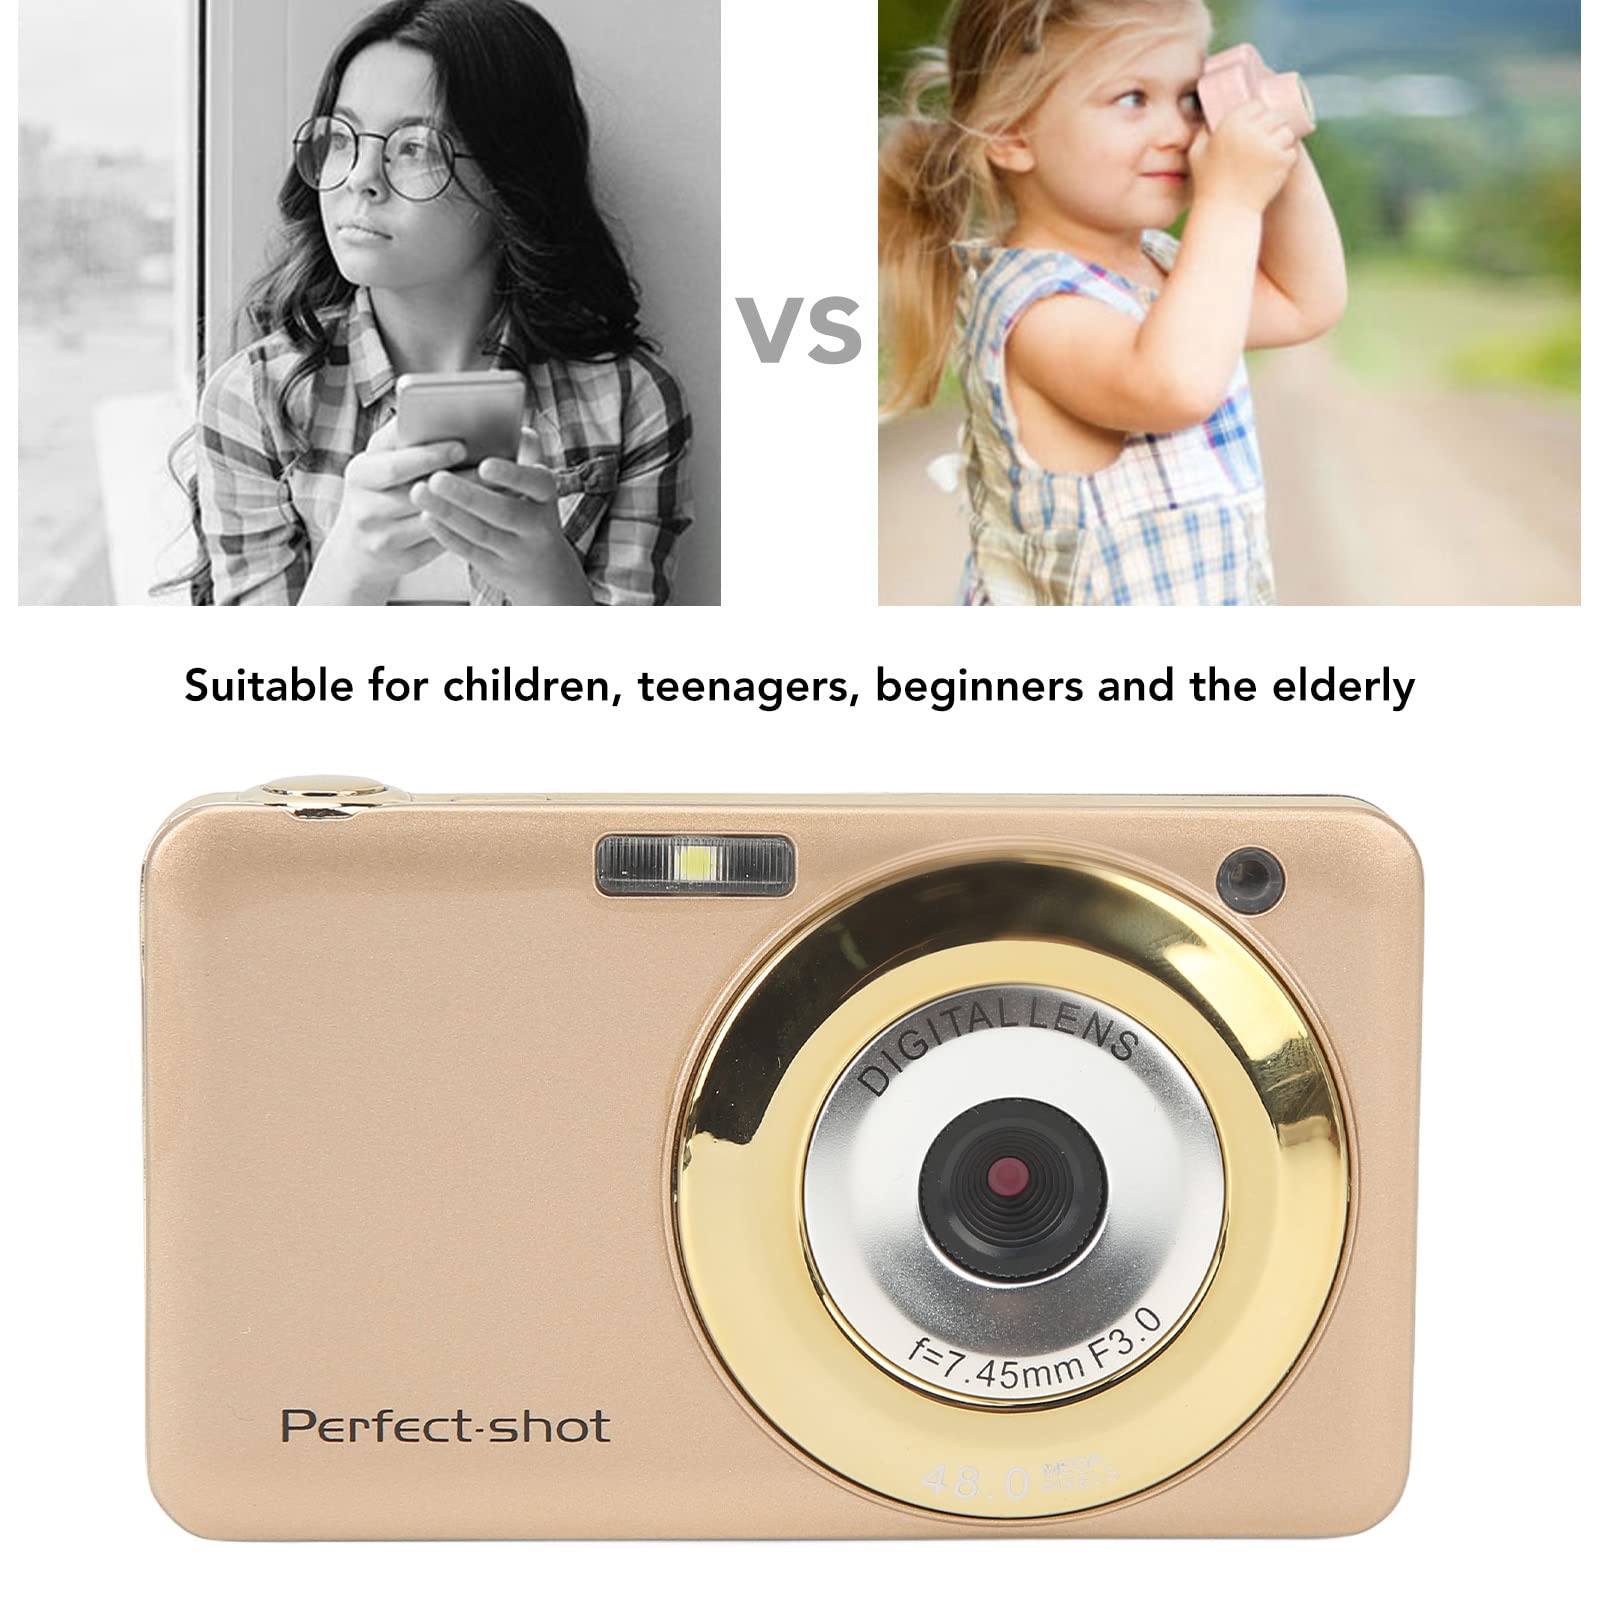 Portable Digital Camera, 48MP HD Digital Camera with 2.7in Screen and 8X Zoom, Vlogging Camera for Children Beginners, Supports 32GB Storage Expansion (Gold)